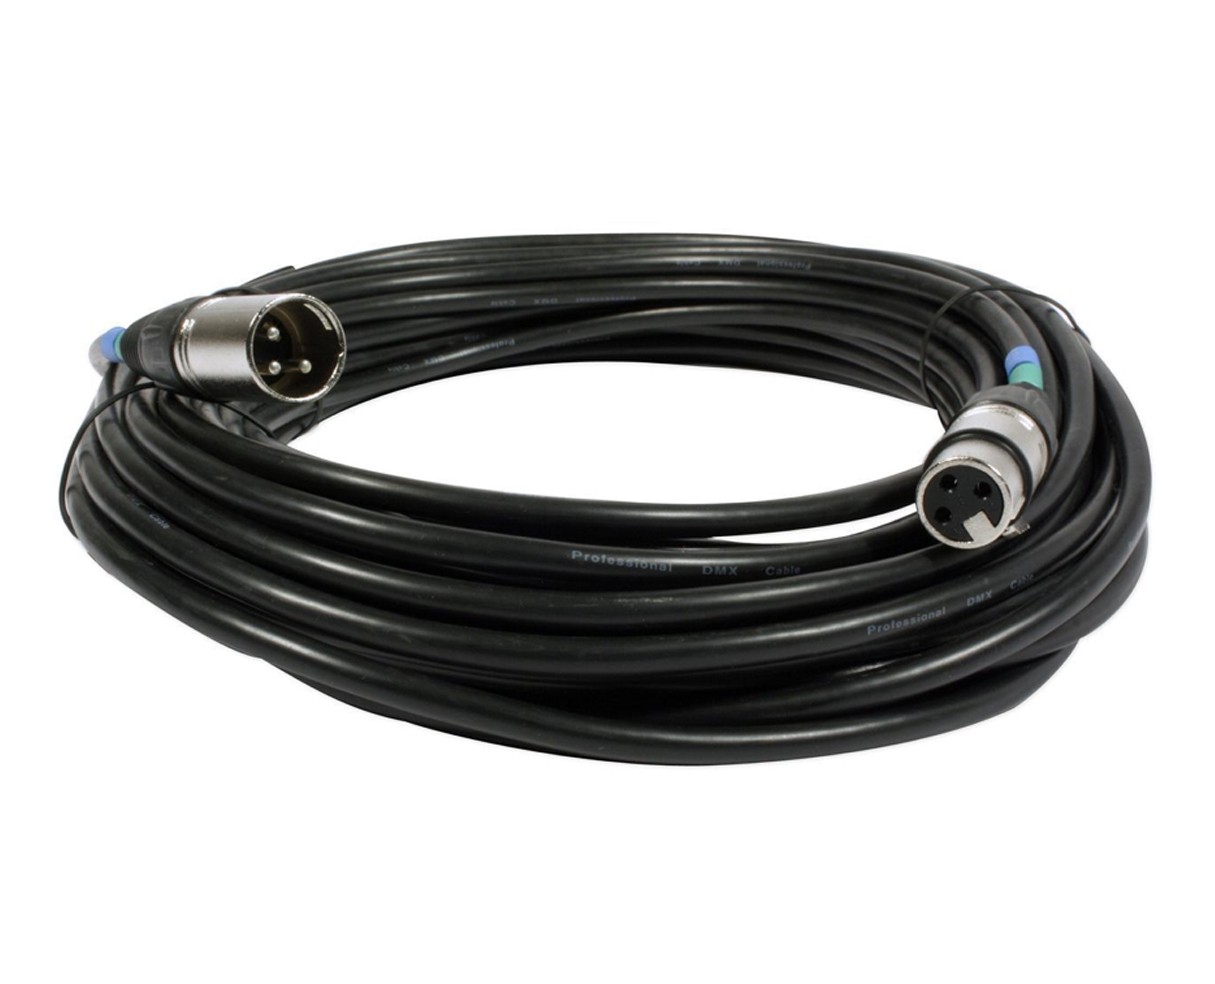 https://www.expressionevents.co.uk/wp-content/uploads/2015/03/dmx-cable.jpg